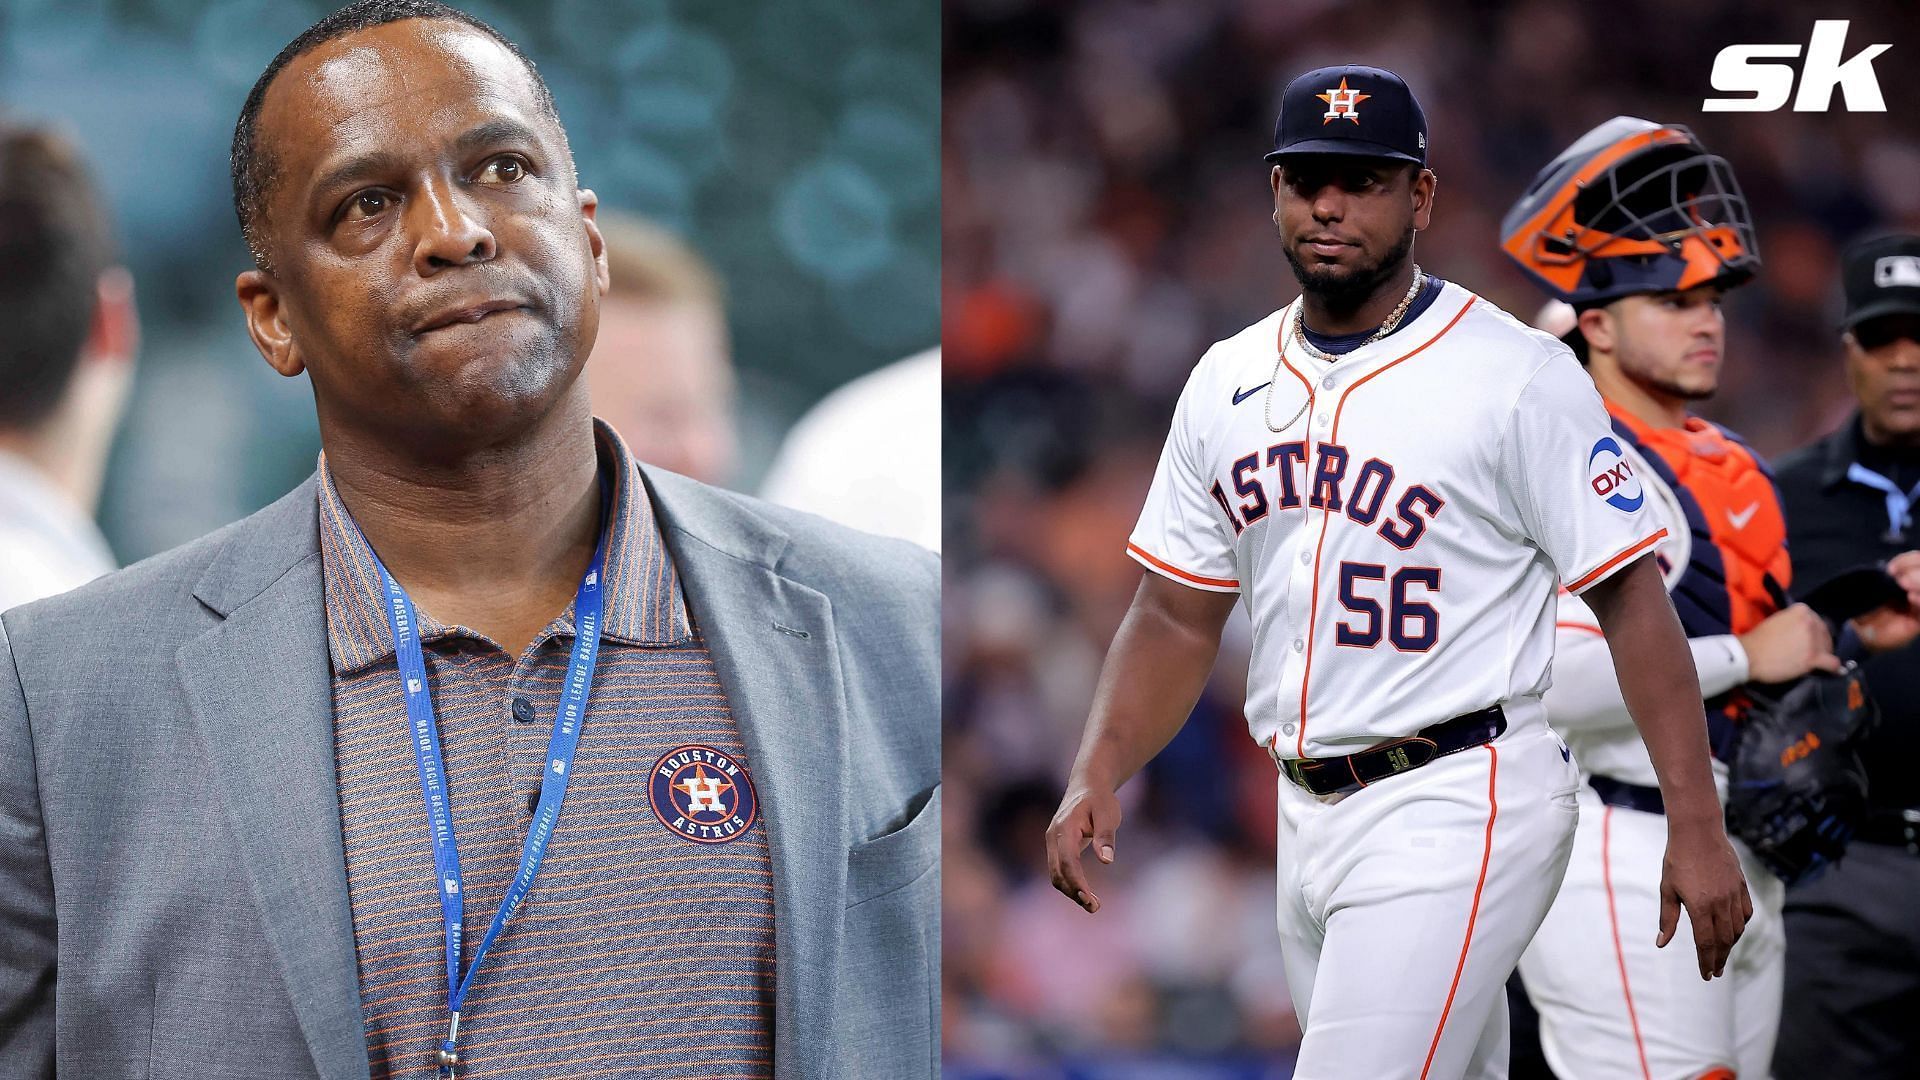 Astros GM Dana Brown says the organization supports Ronel Blanco as he begins 10-game suspension